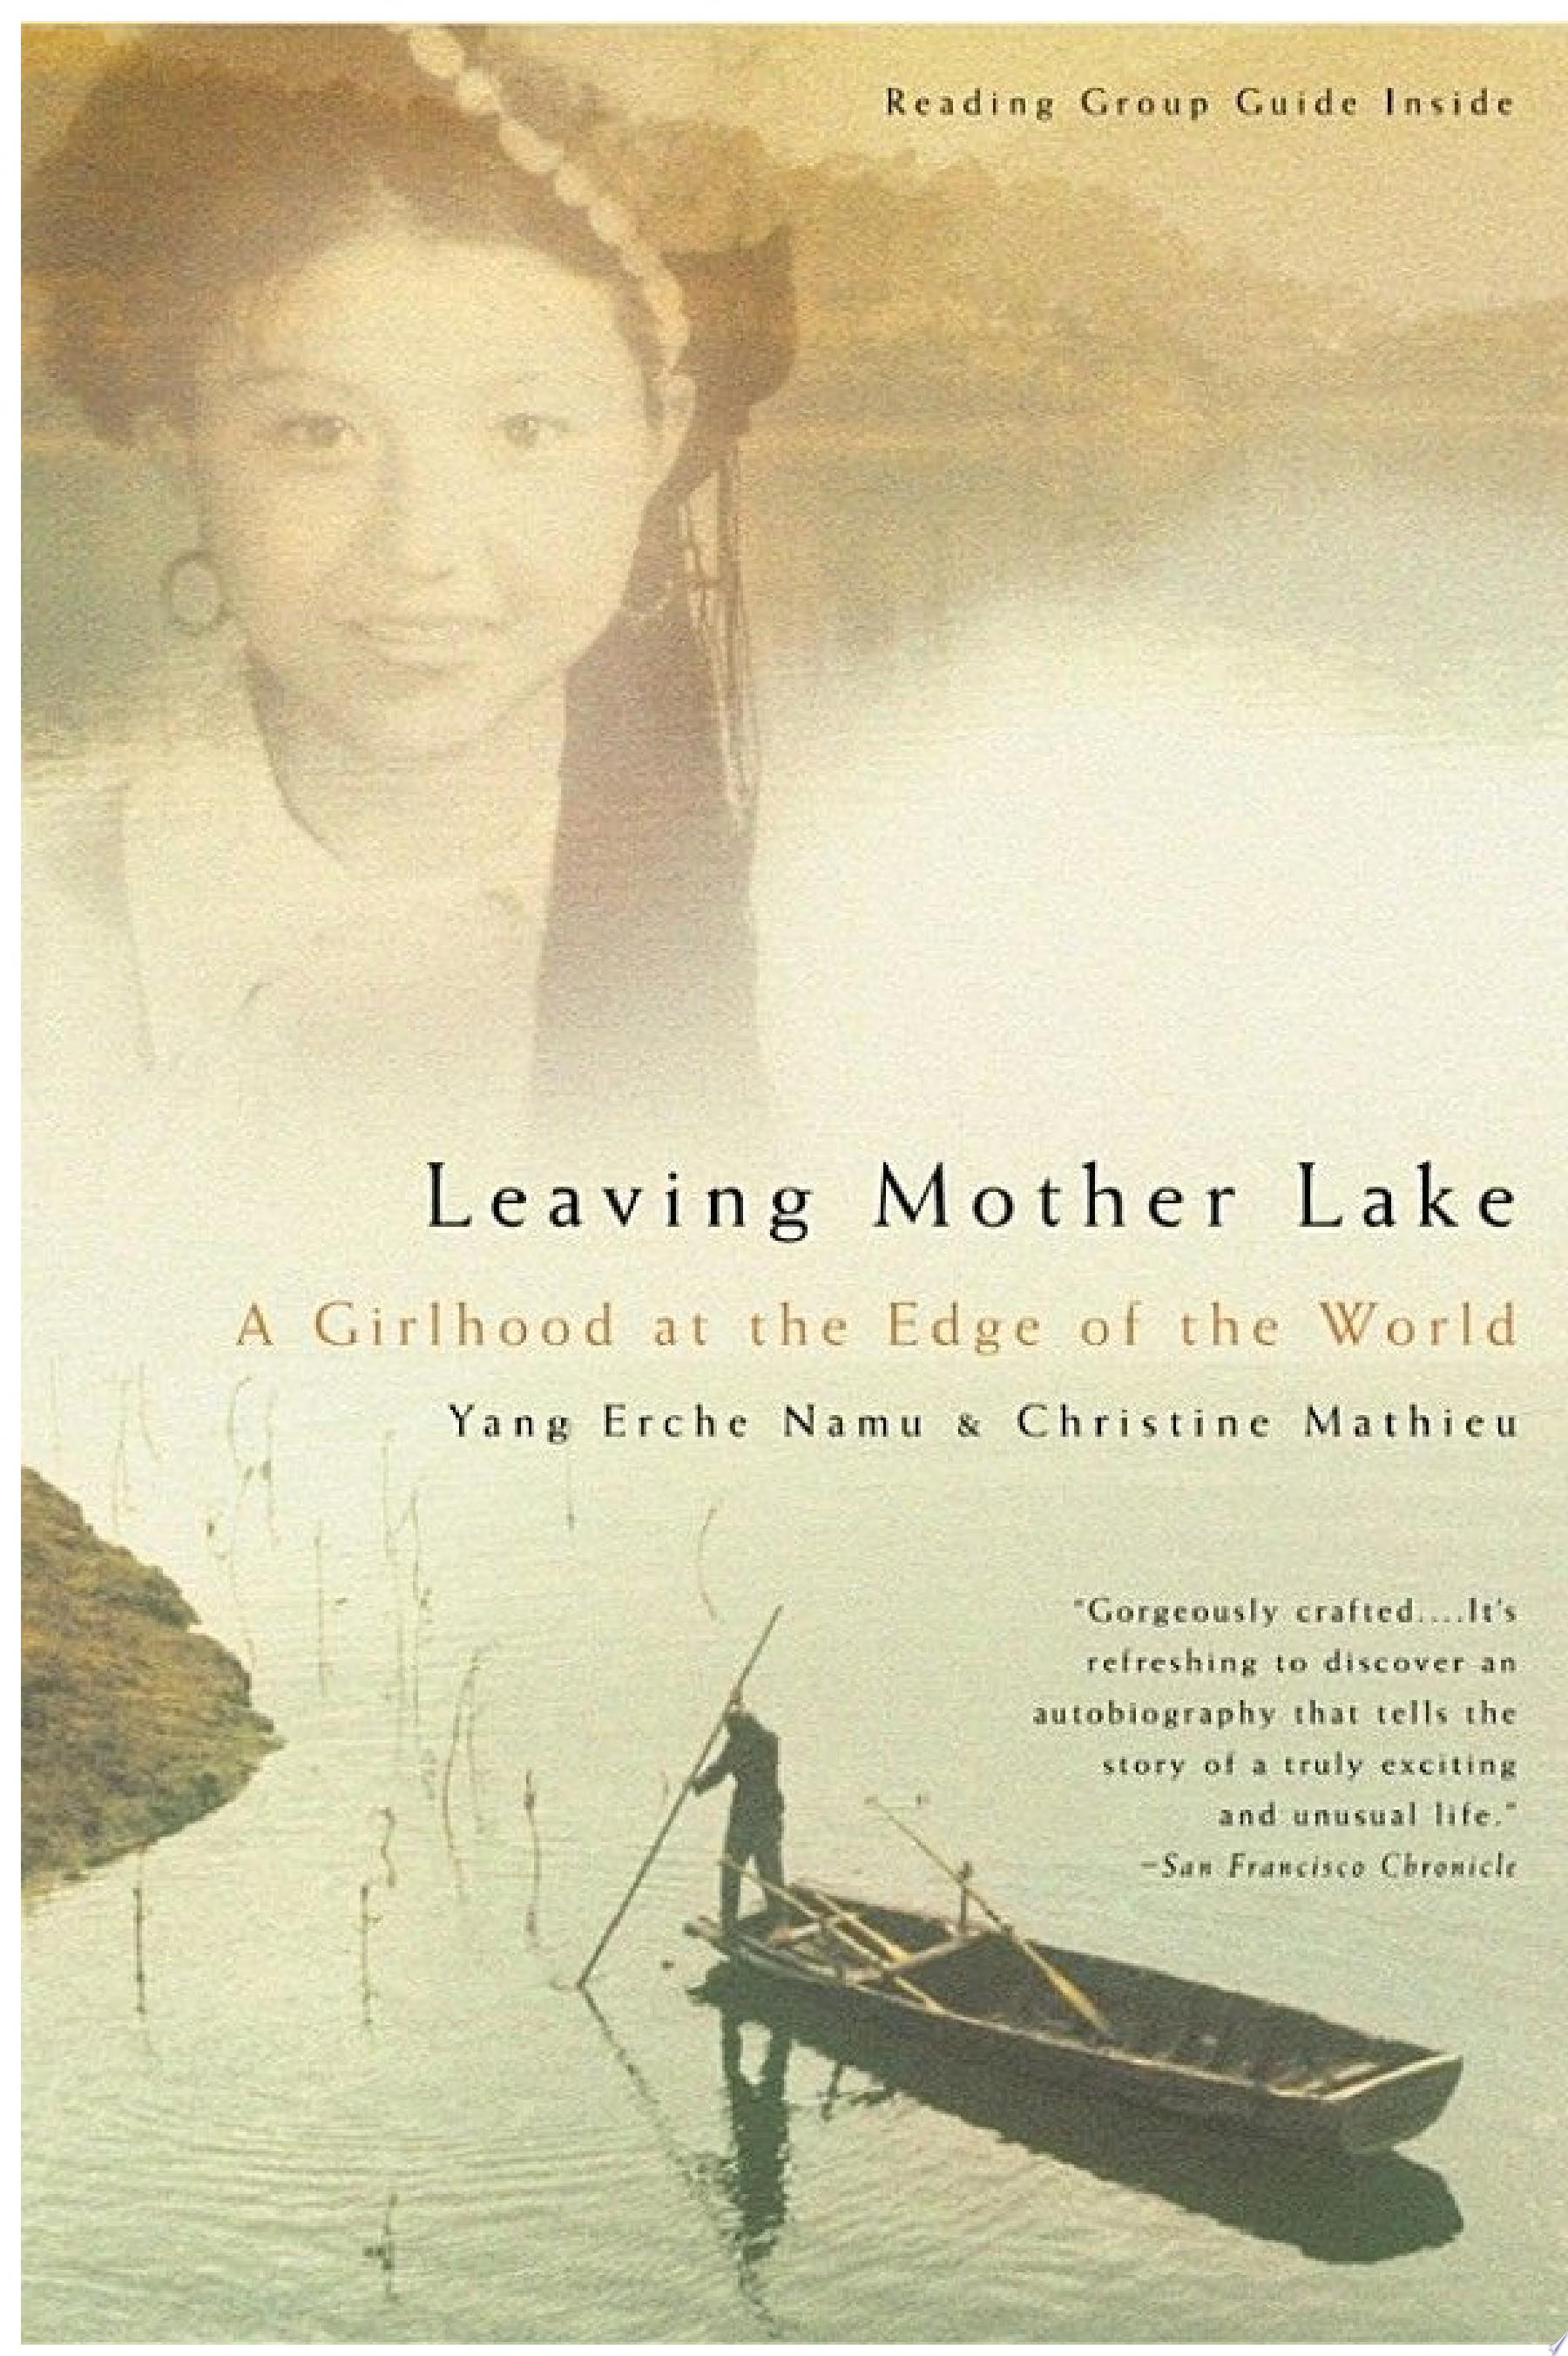 Image for "Leaving Mother Lake"